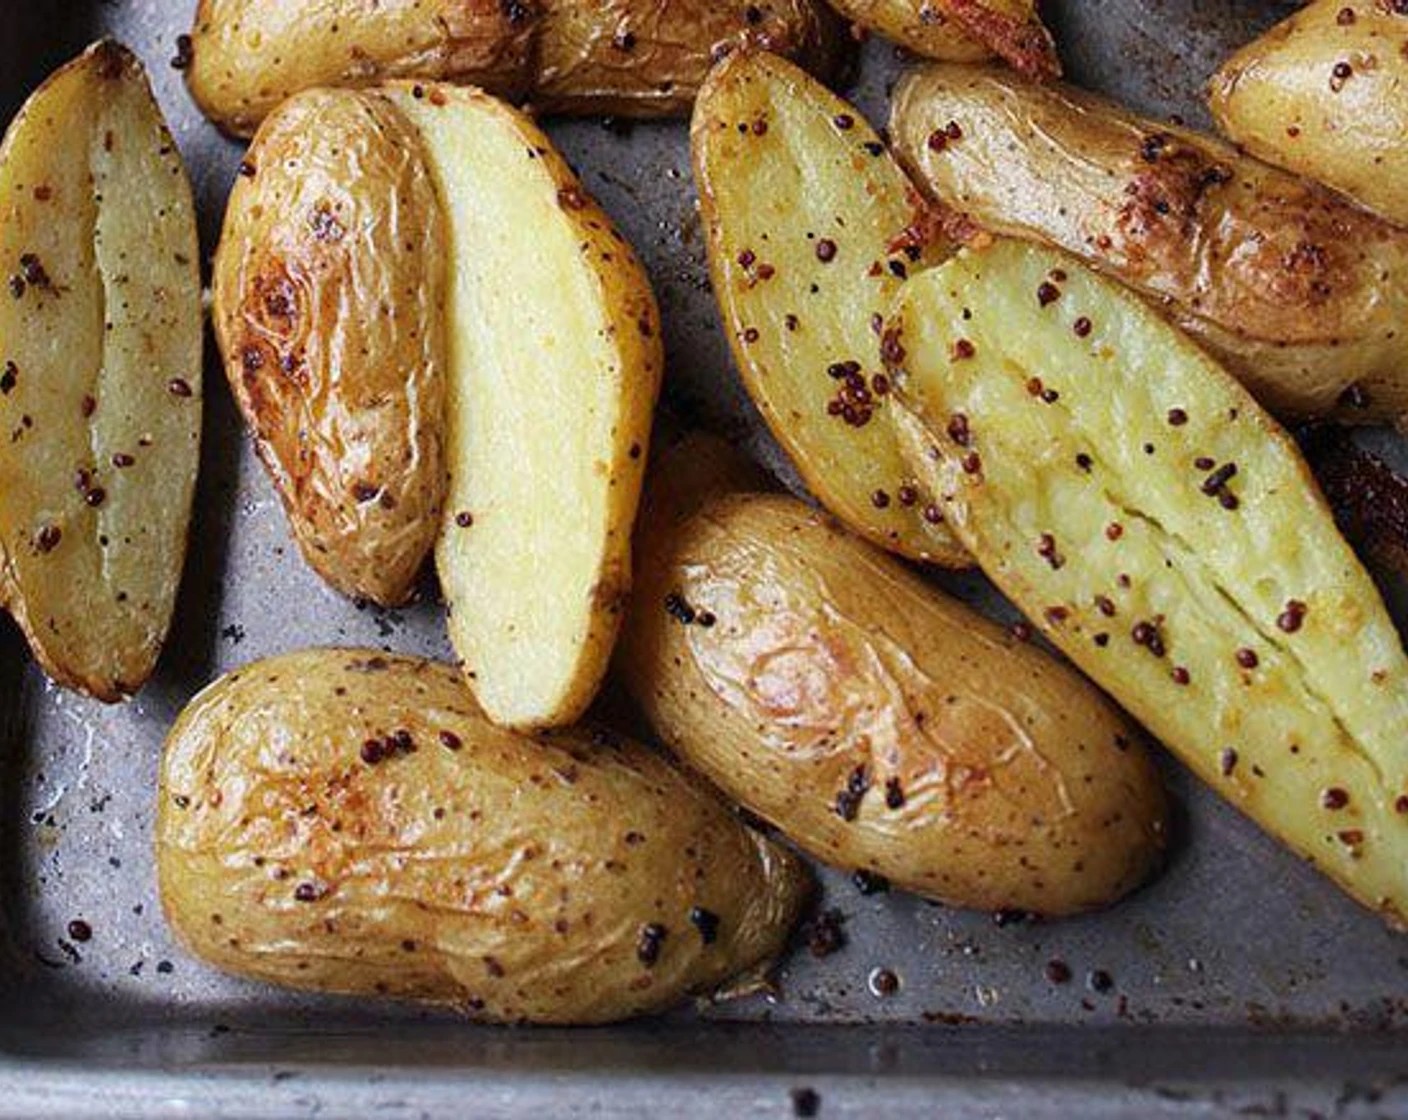 step 2 Cut the Fingerling Potatoes (6 cups) in half lengthwise and place them on a sheet pan. Add Extra-Virgin Olive Oil (2 Tbsp), Kosher Salt (1 tsp), Freshly Ground Black Pepper (1/4 tsp), and the Whole Grain Mustard (1/2 Tbsp) to the potatoes, and toss well with your hands to coat.